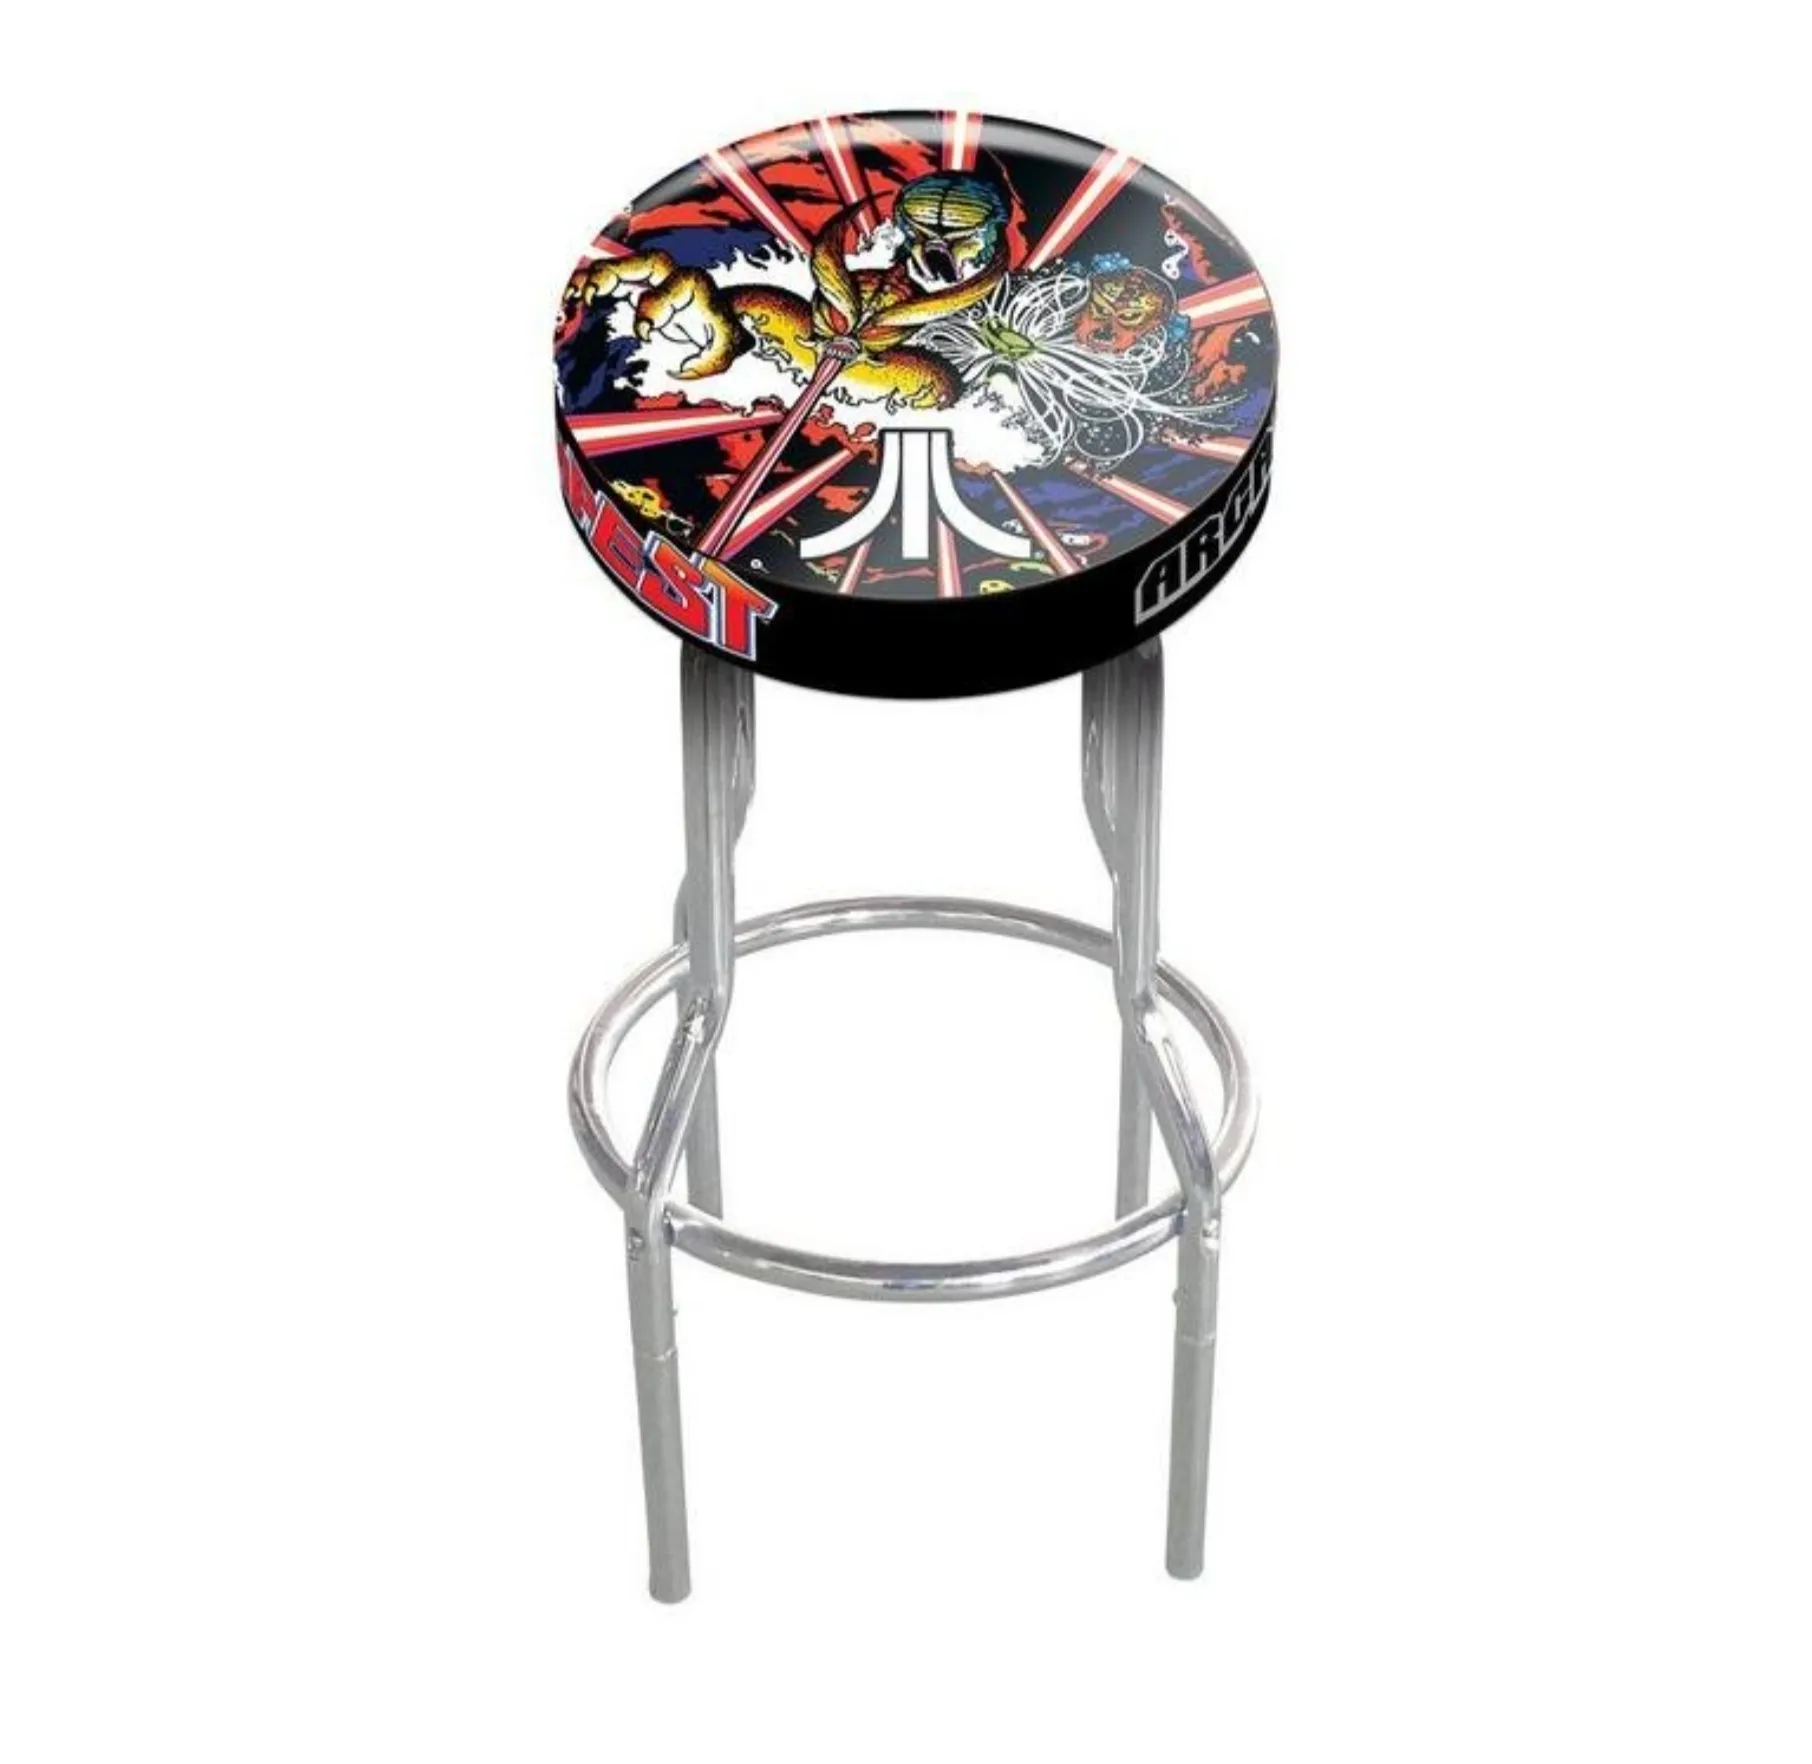 Arcade1Up Stools - Tempest and Street Fighter II - $59.99